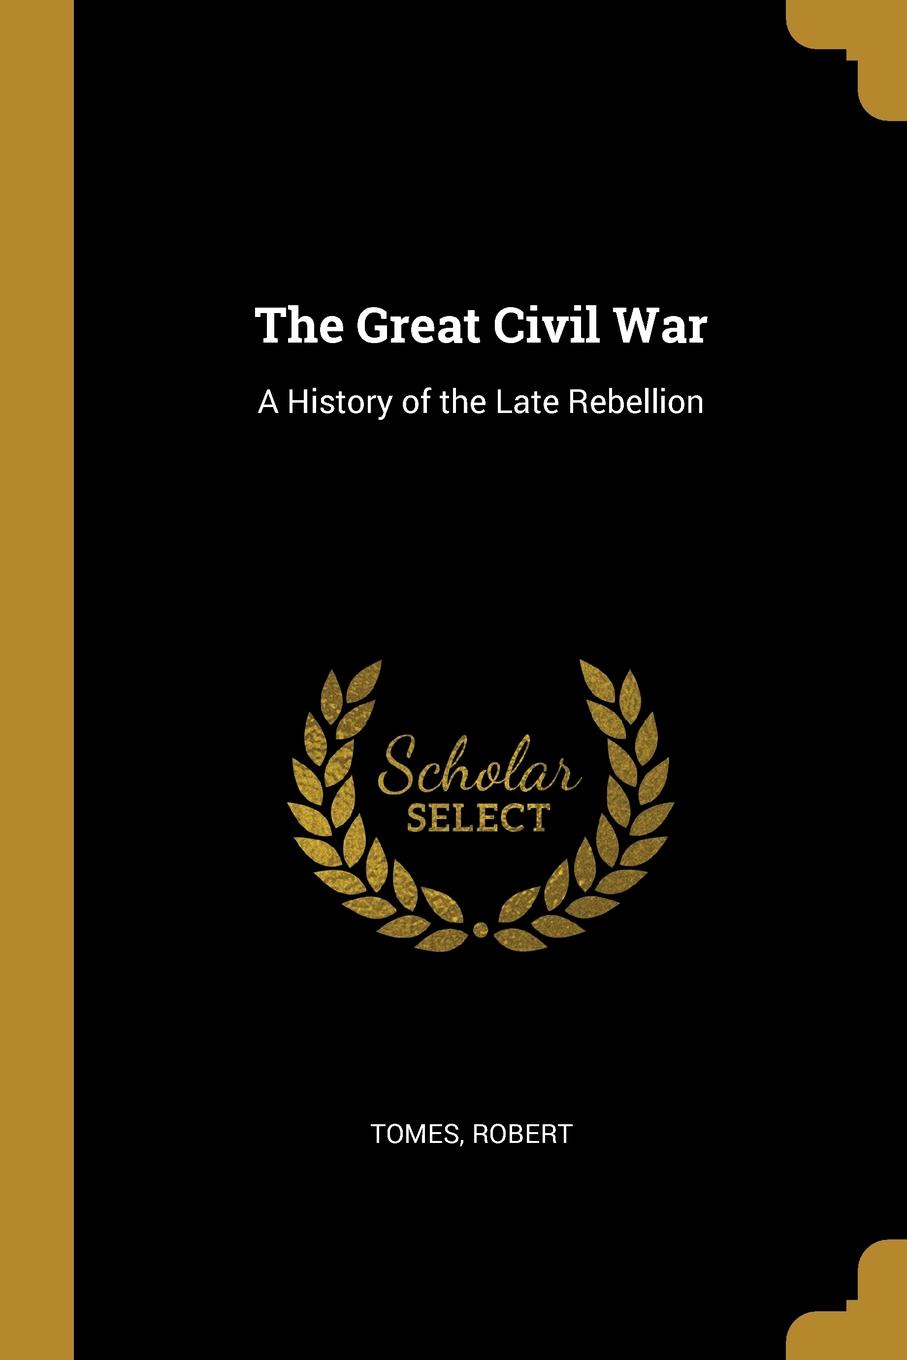 The Great Civil War. A History of the Late Rebellion